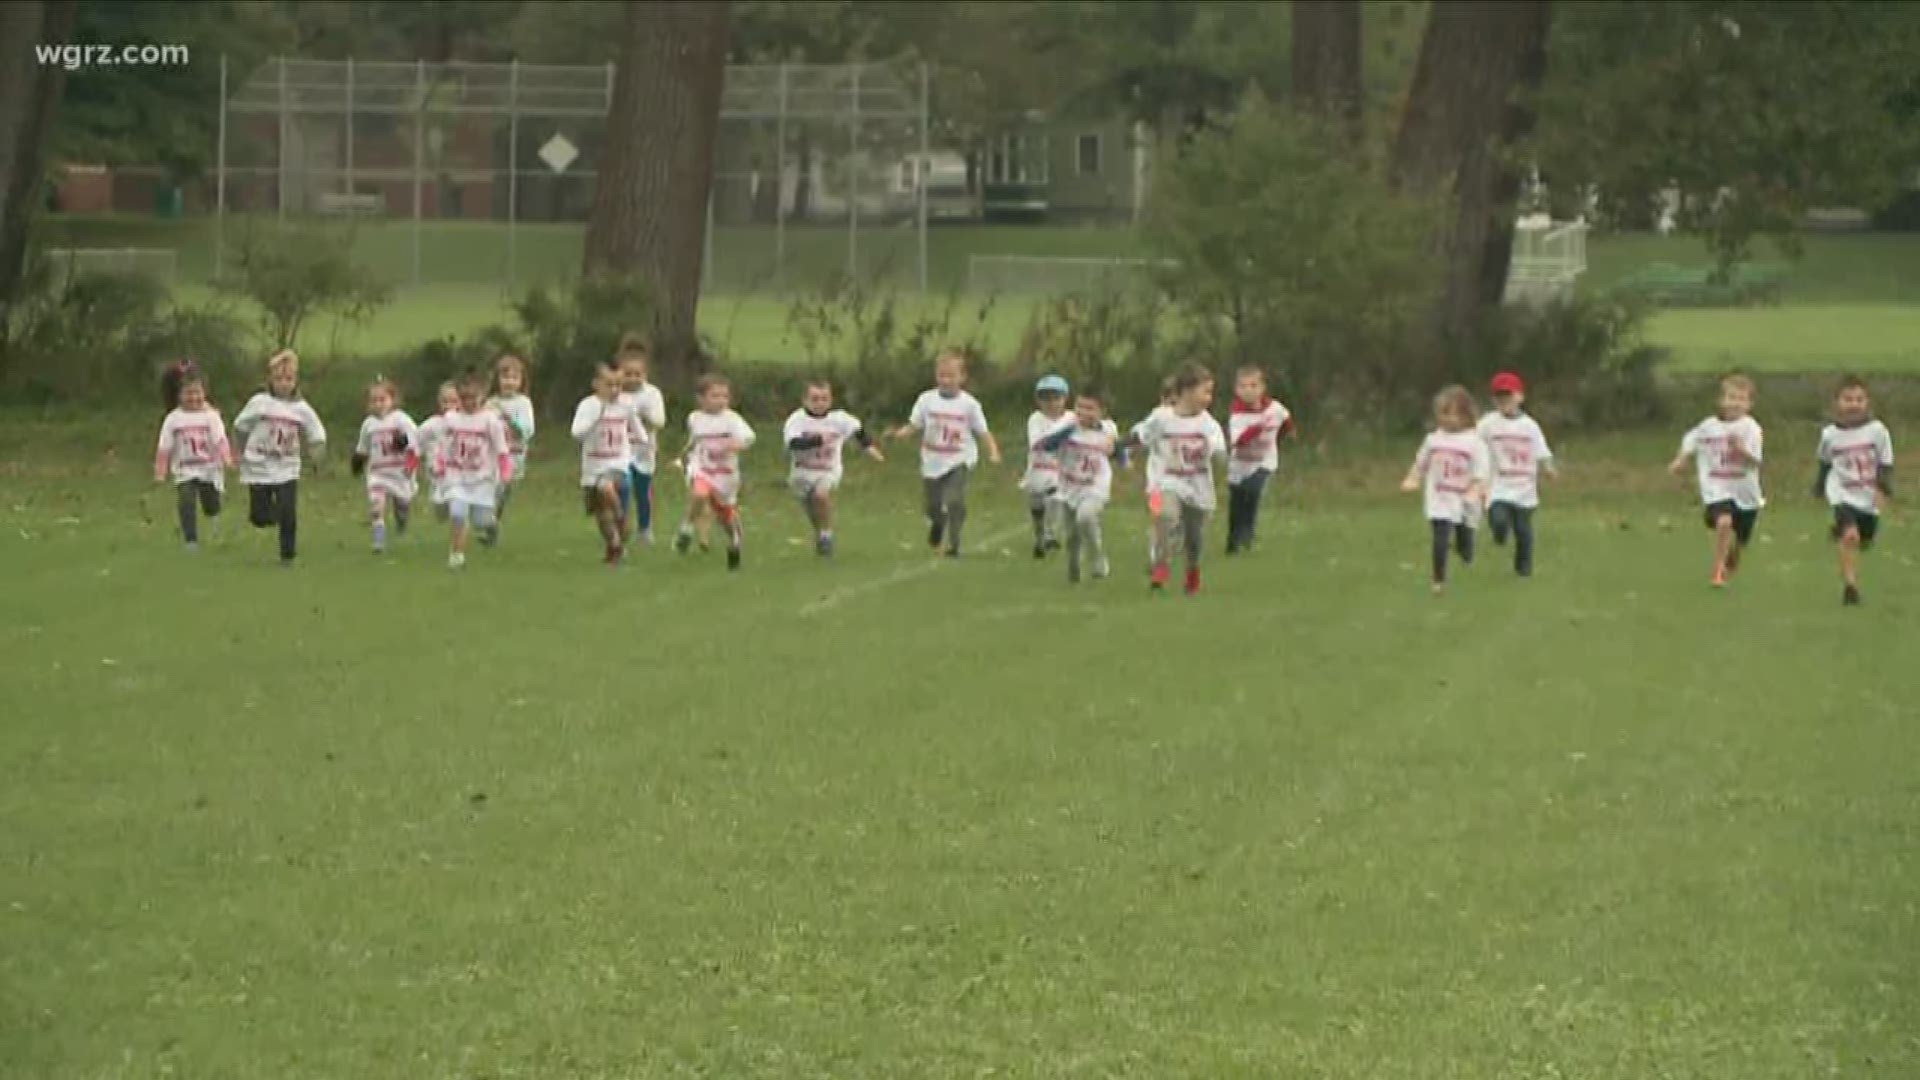 The Dog Ears Bookstore in South Buffalo hosted its annual "I Read It" run for kids at Cazenovia Park.